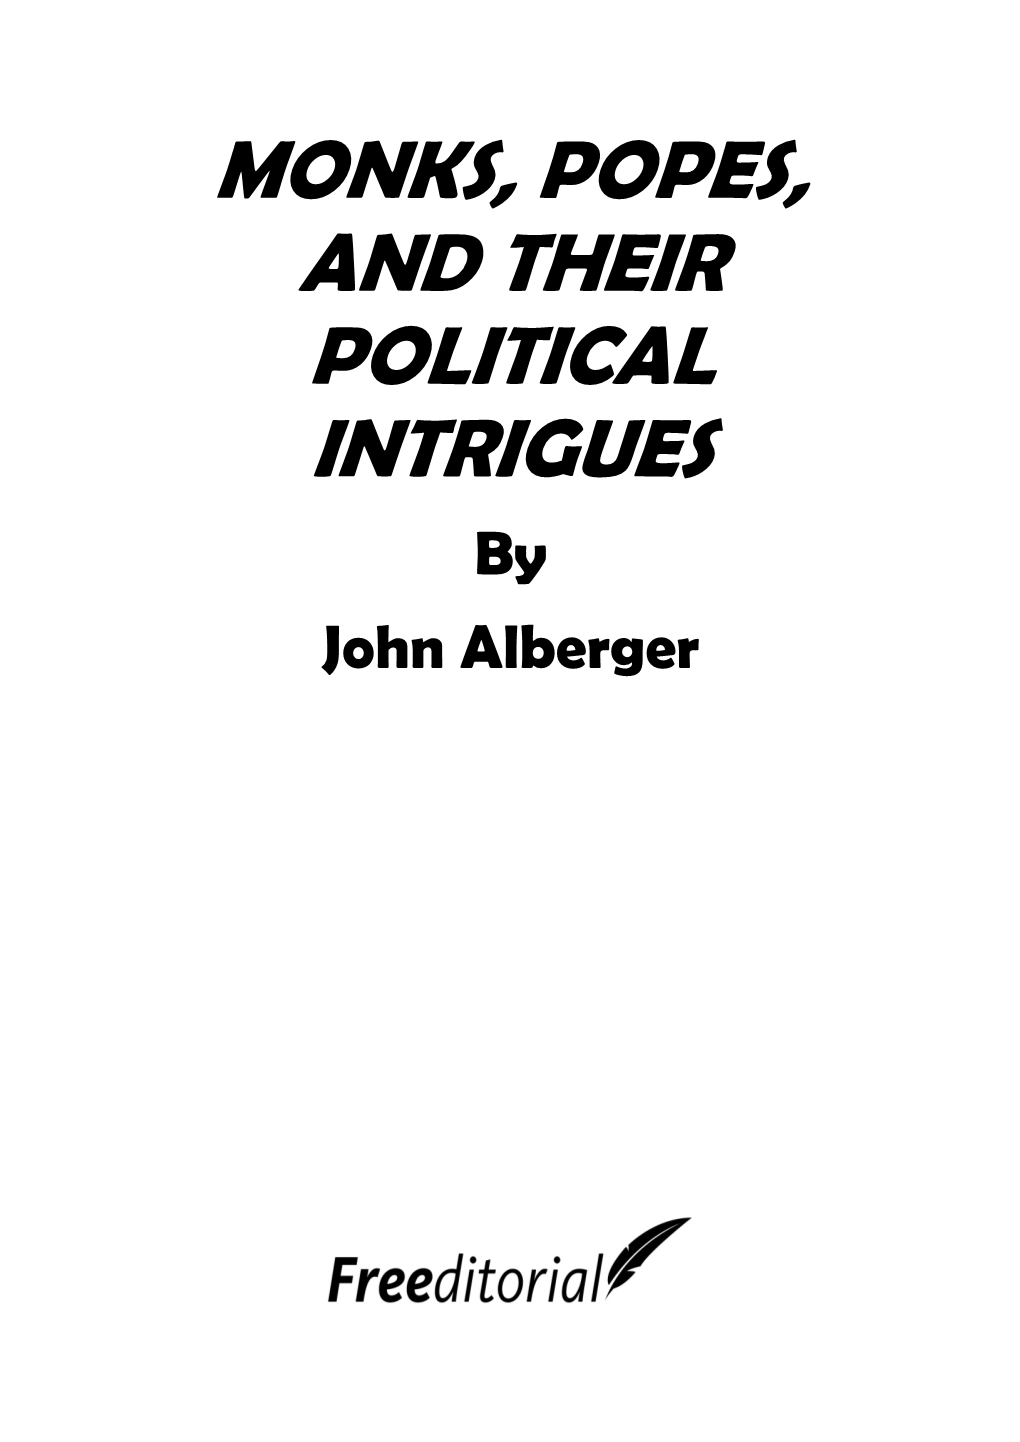 MONKS, POPES, and THEIR POLITICAL INTRIGUES by John Alberger